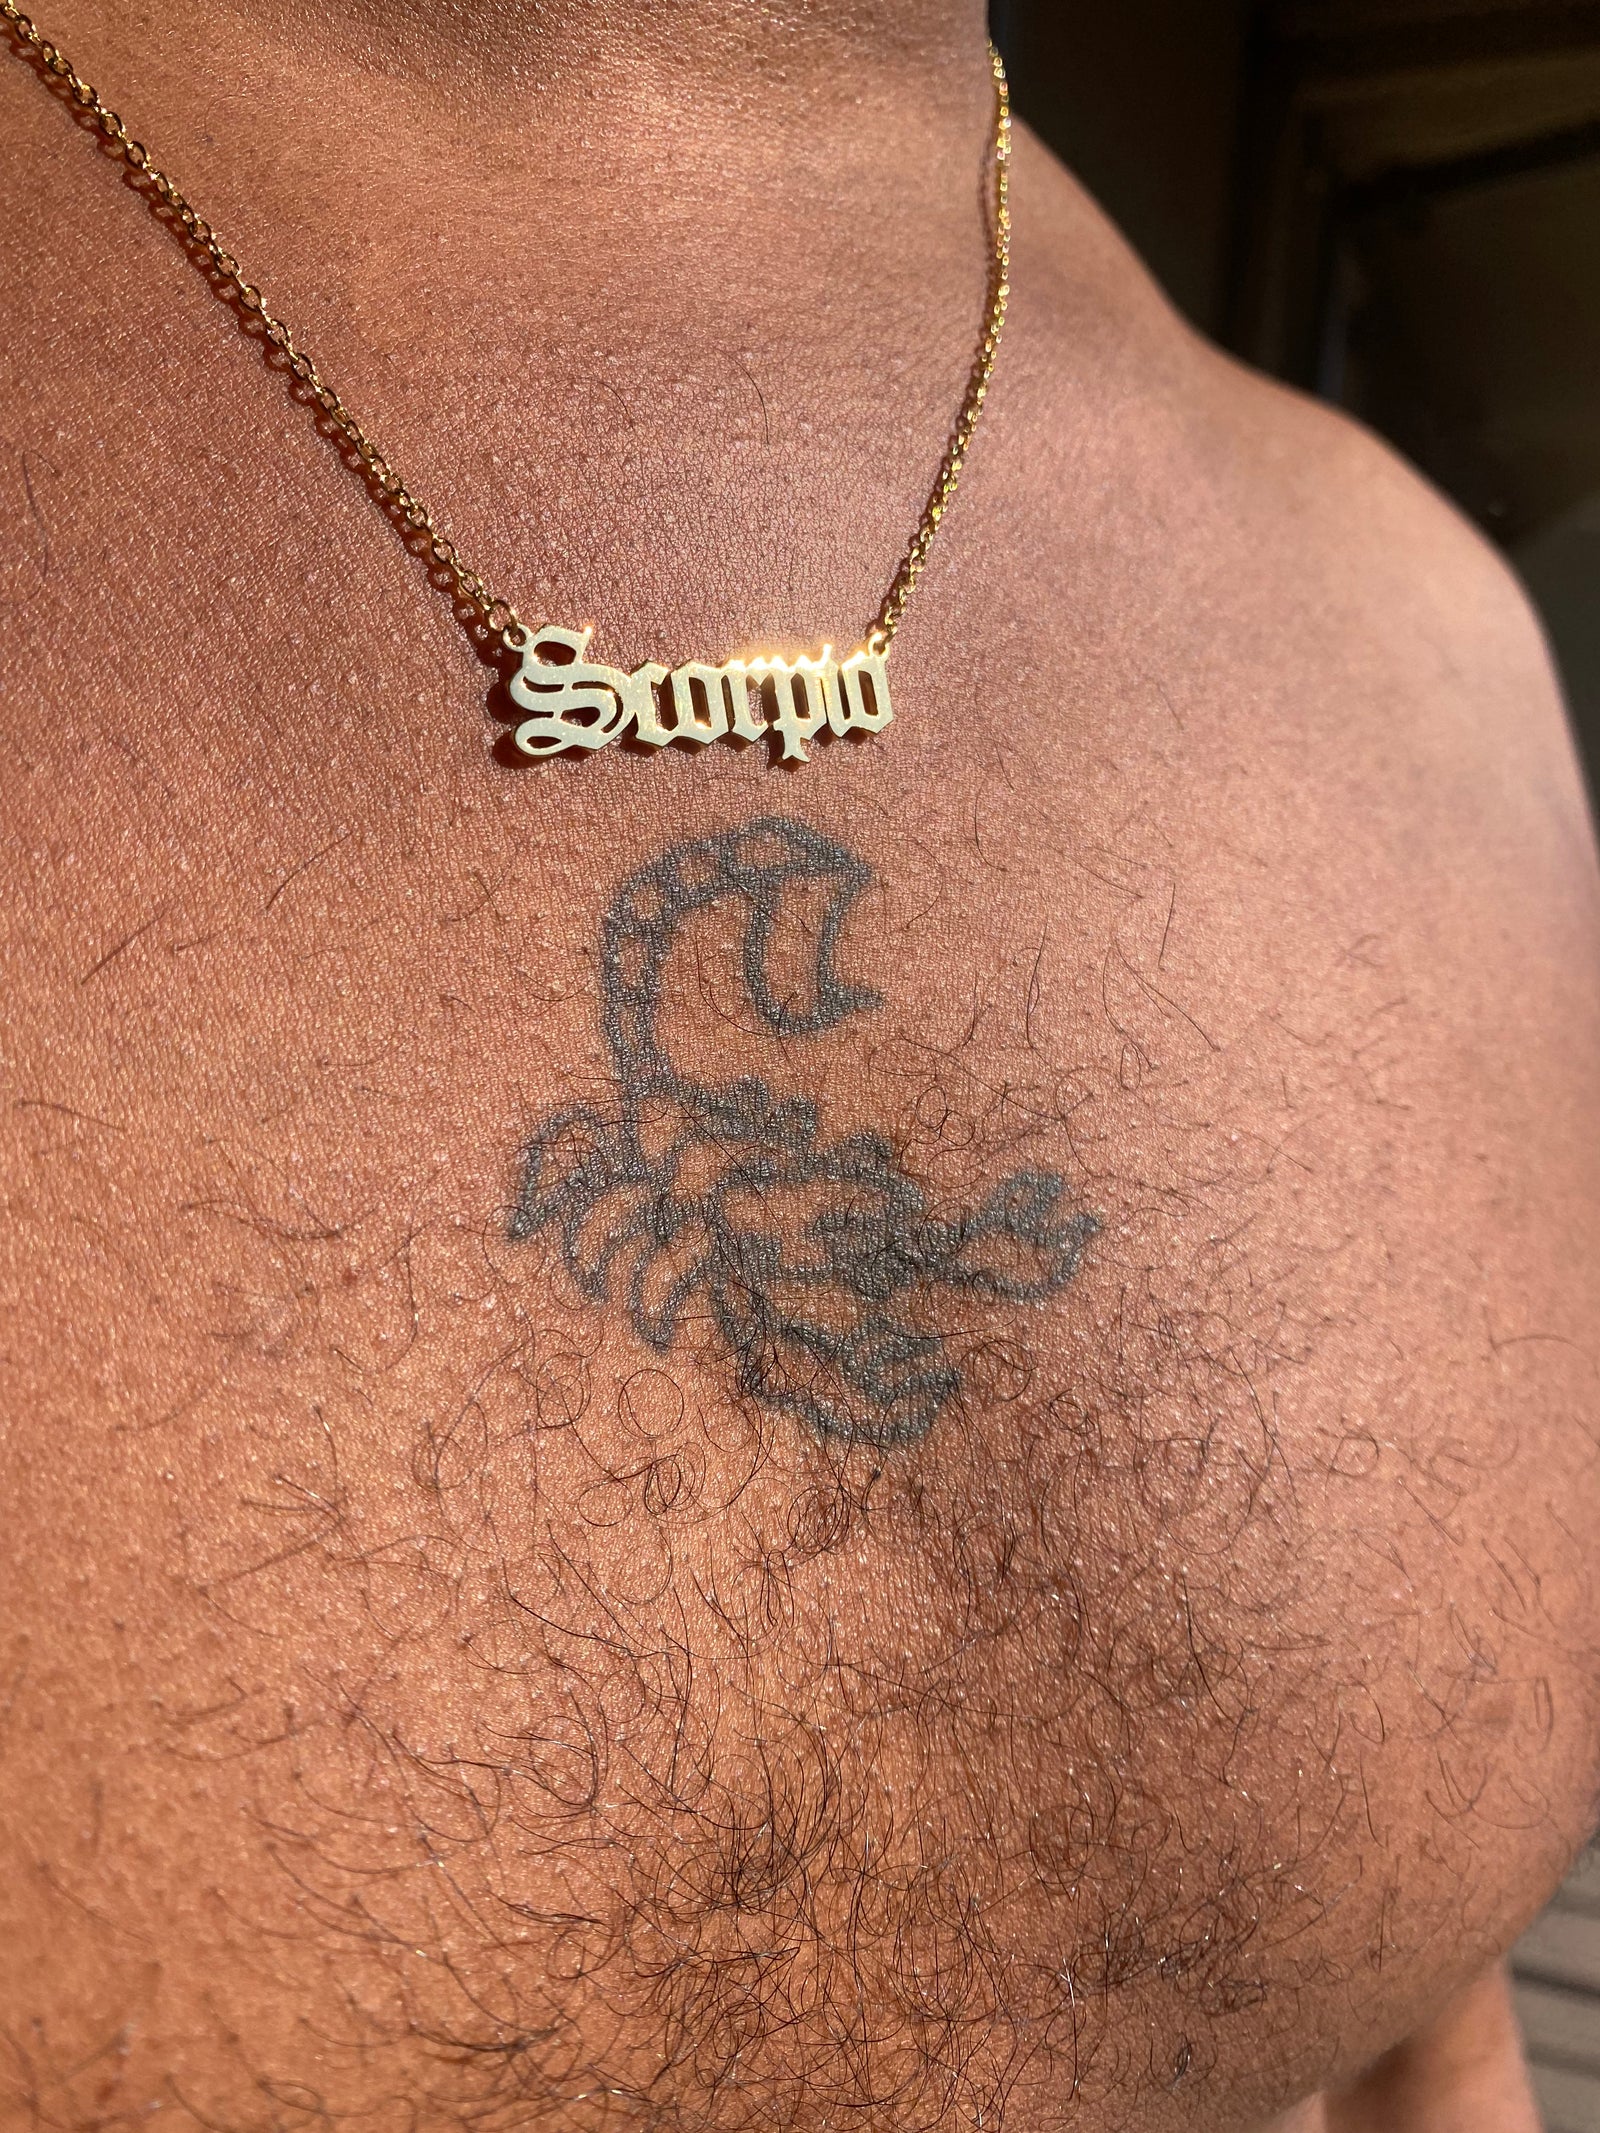 What’s Your Sign Necklace